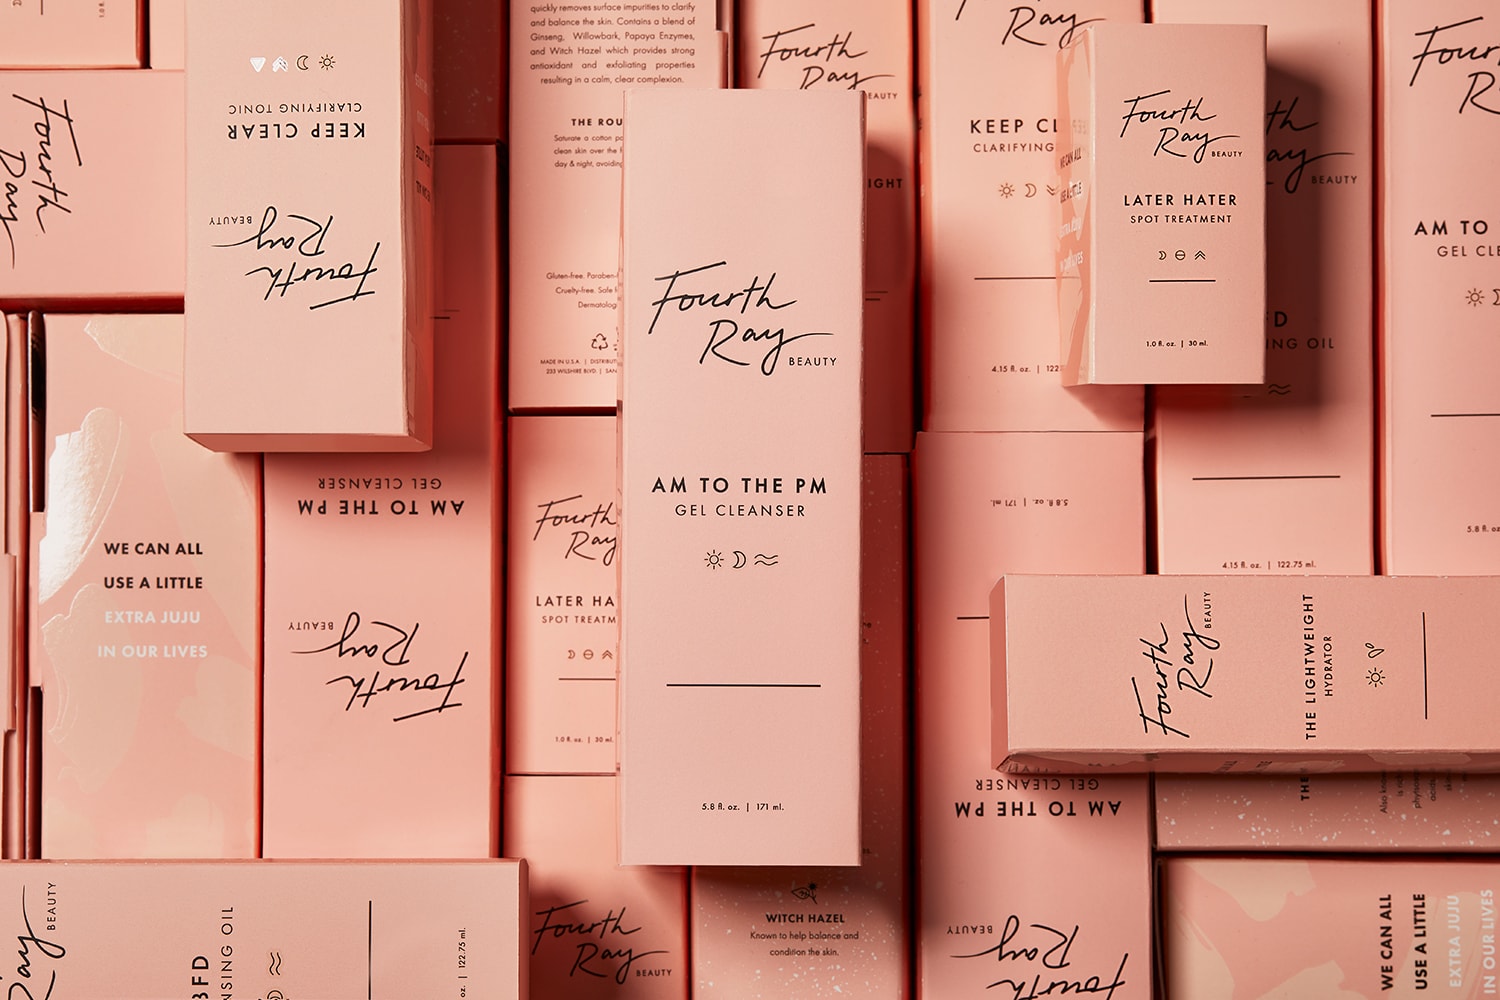 ColourPop Skincare Sister Brand Fourth Ray Beauty Products Packaging